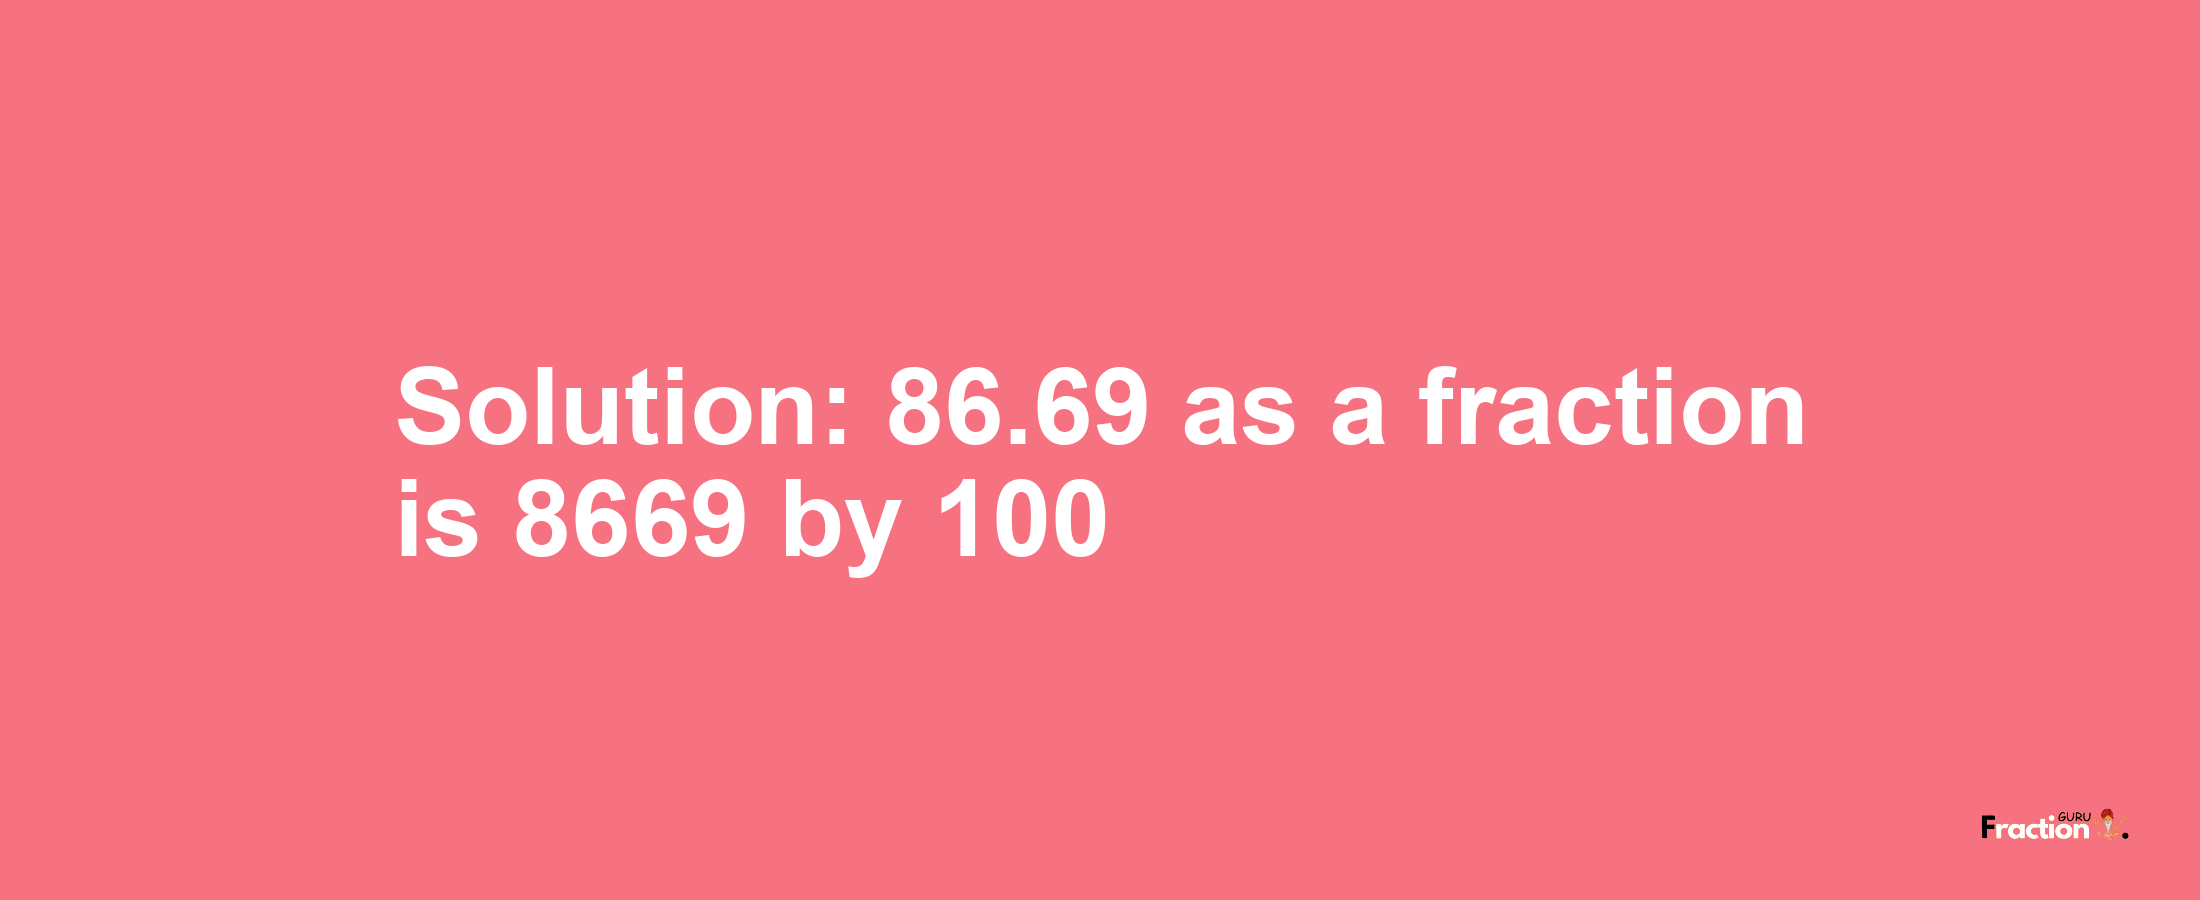 Solution:86.69 as a fraction is 8669/100